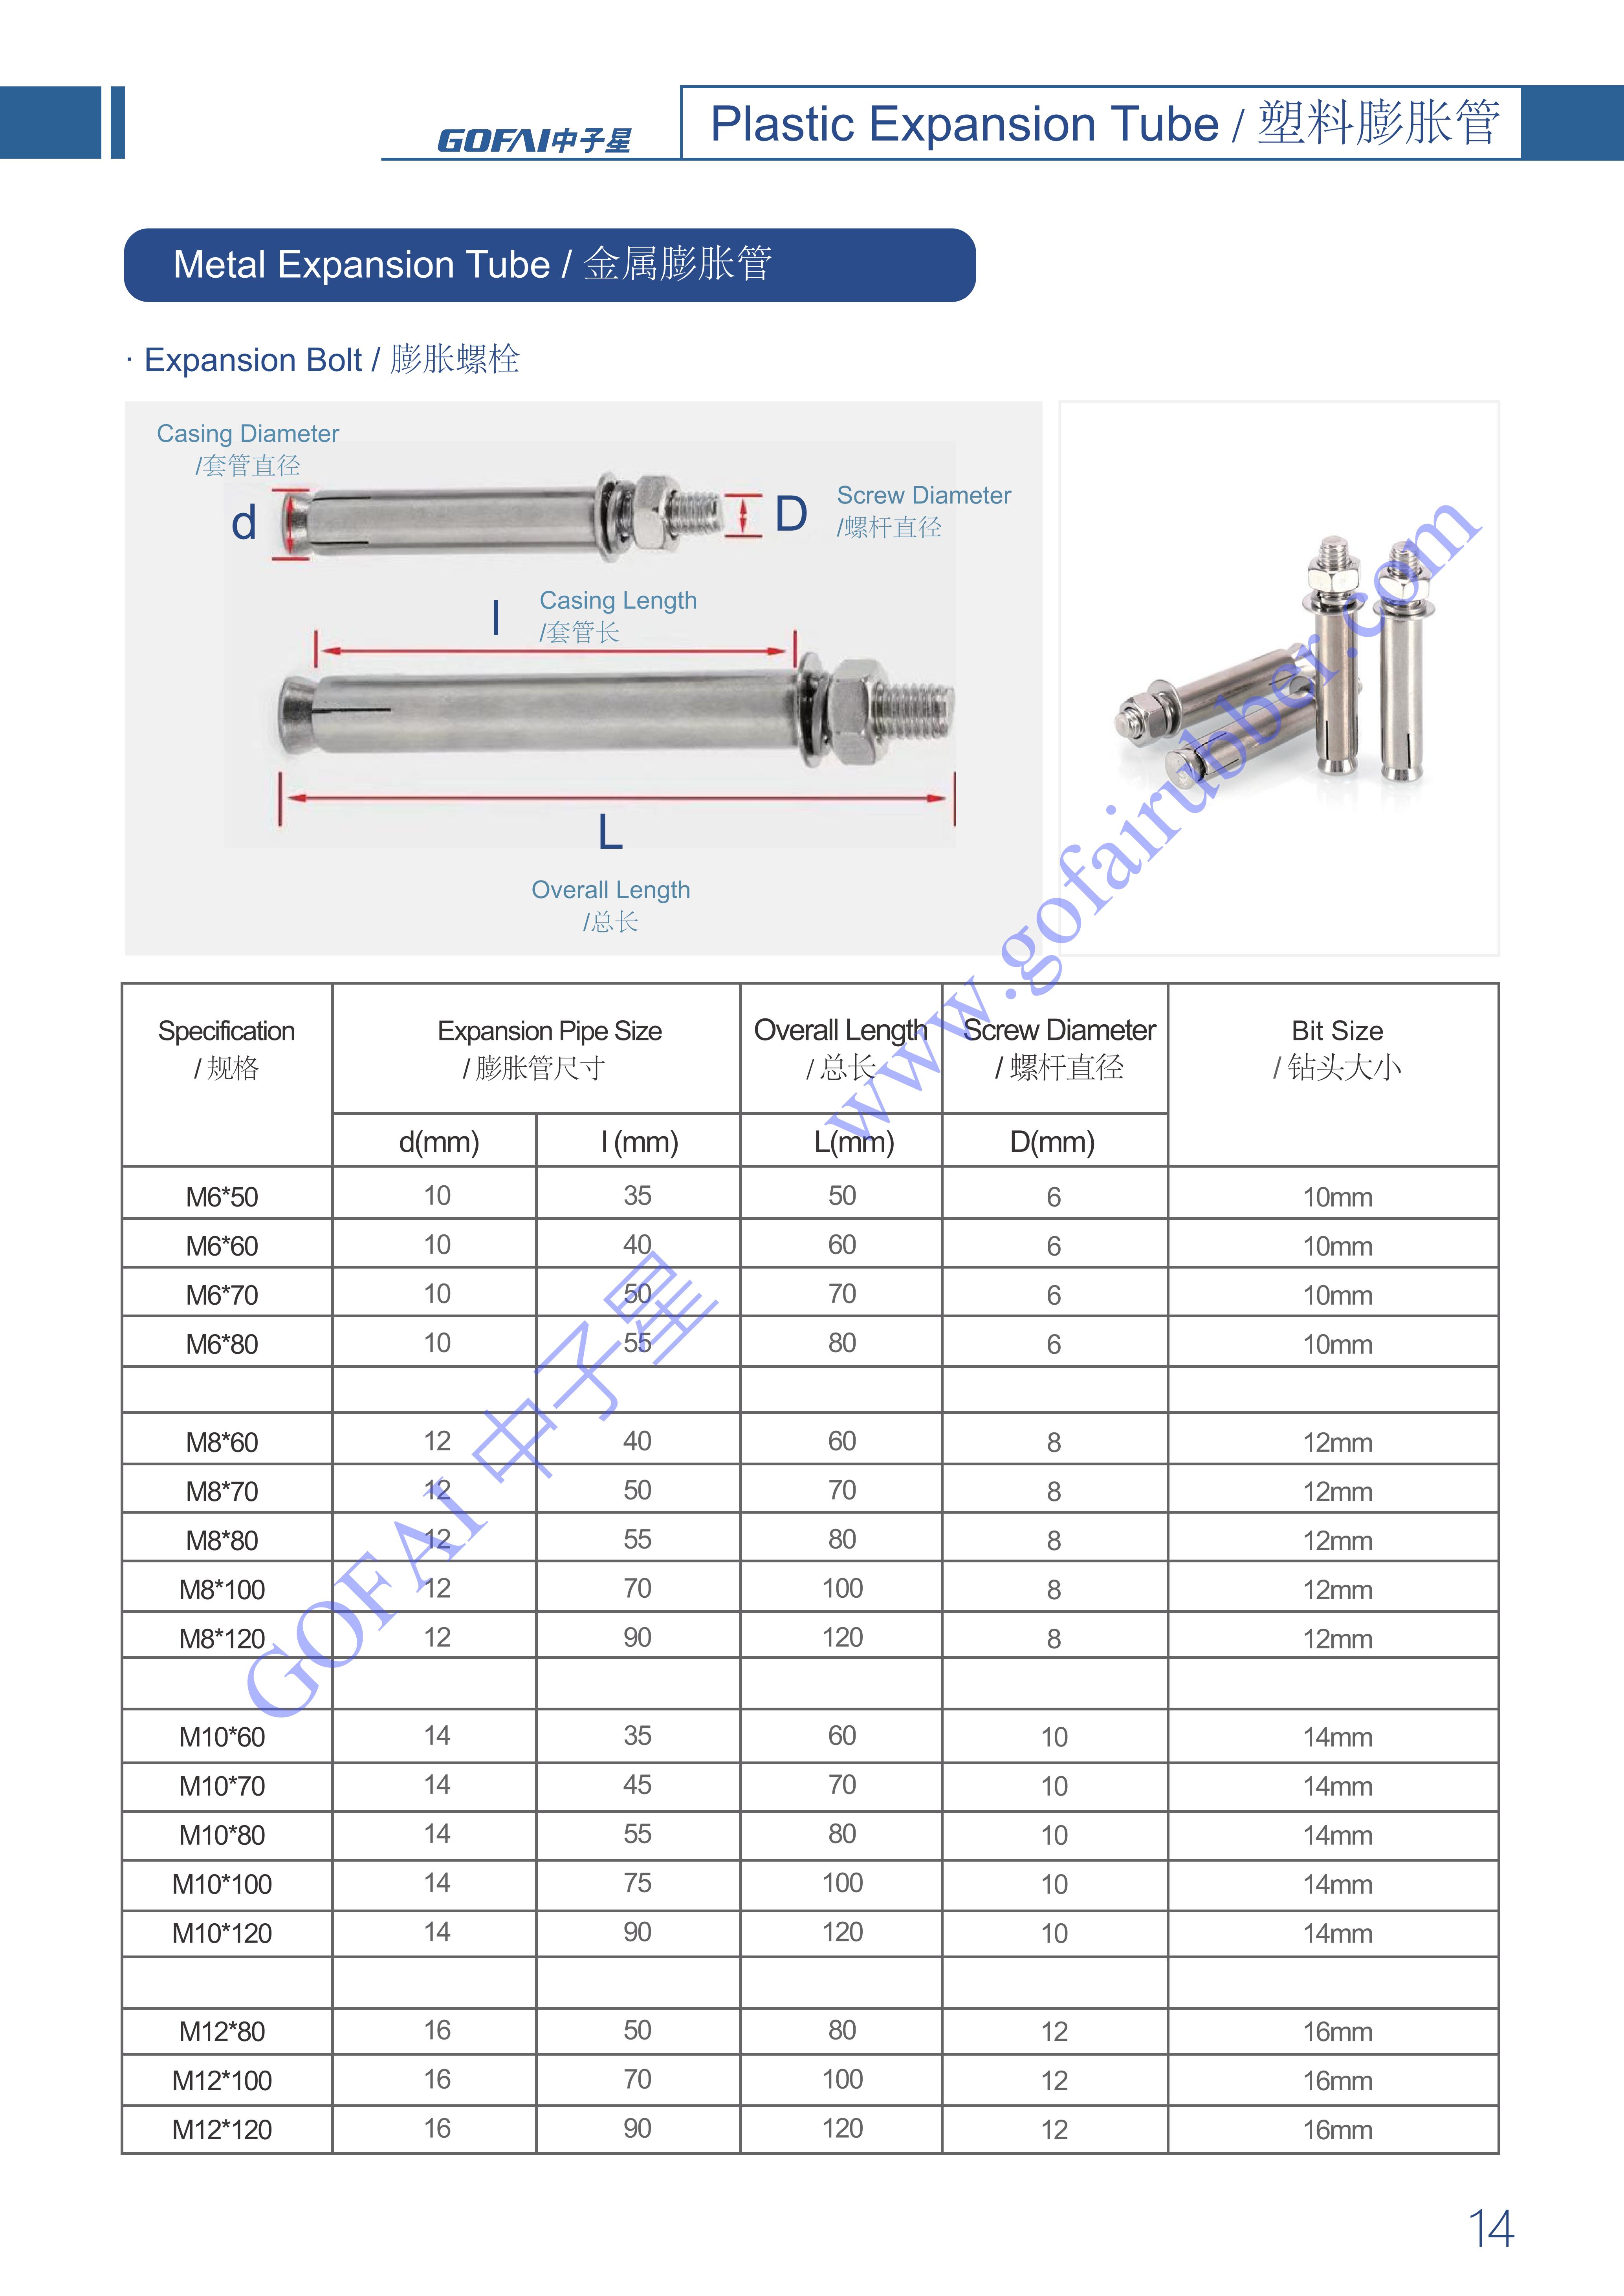 GOFAI Plastic Expansion Tube Series Products Brochure_15.jpg